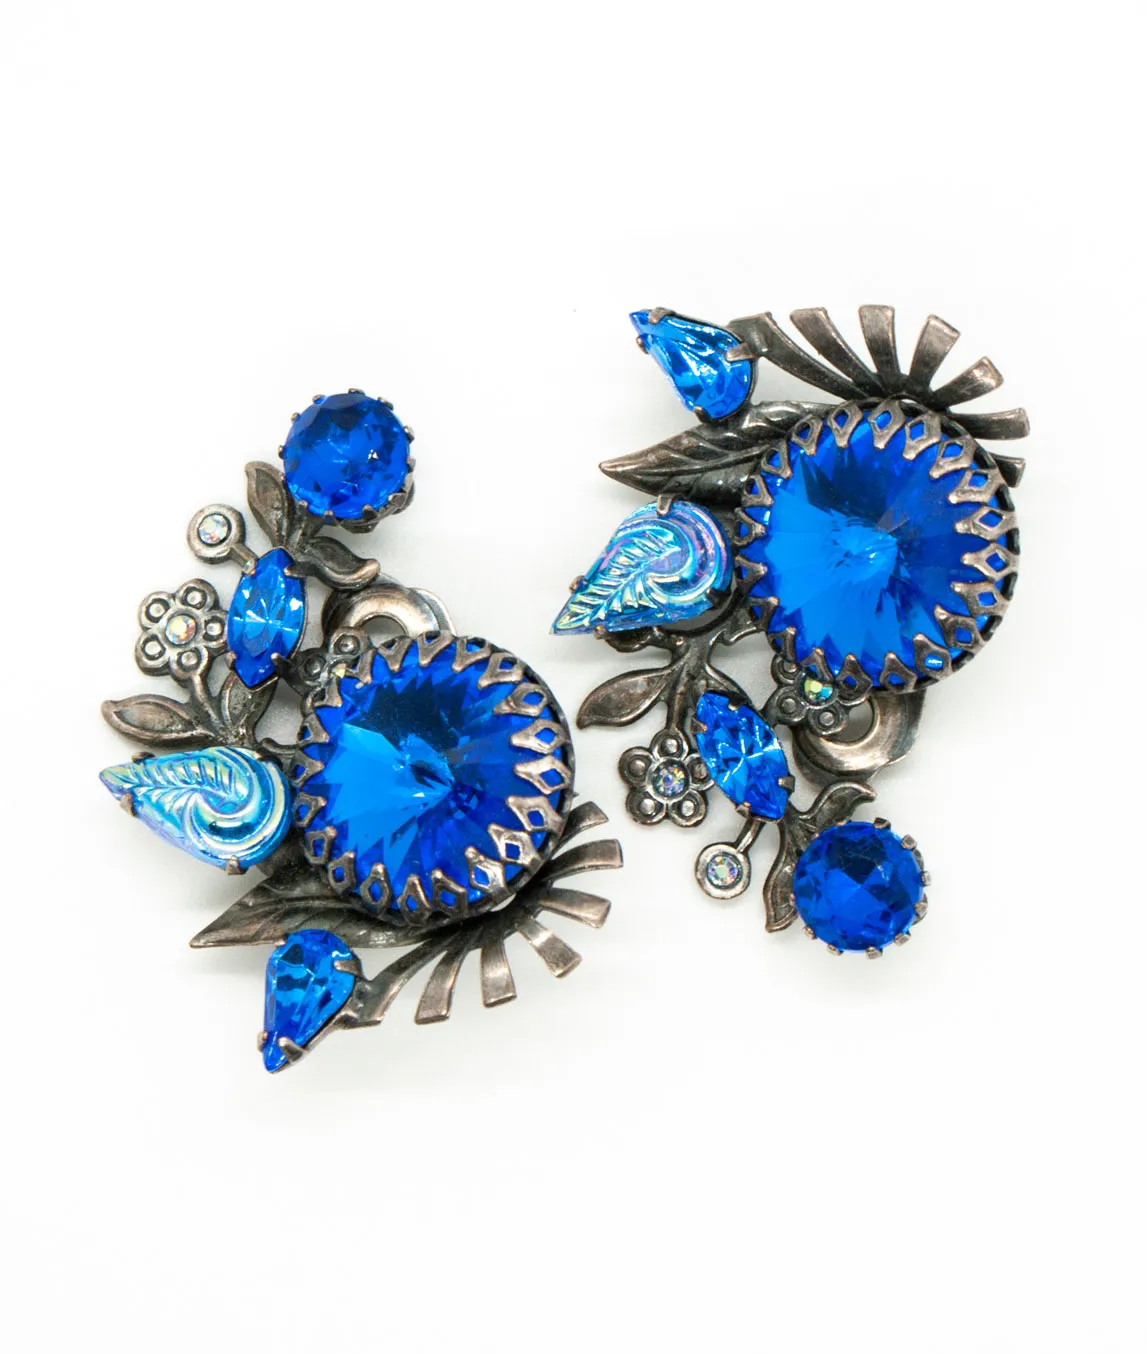 Blue and silver vintage glass earrings by Askew London